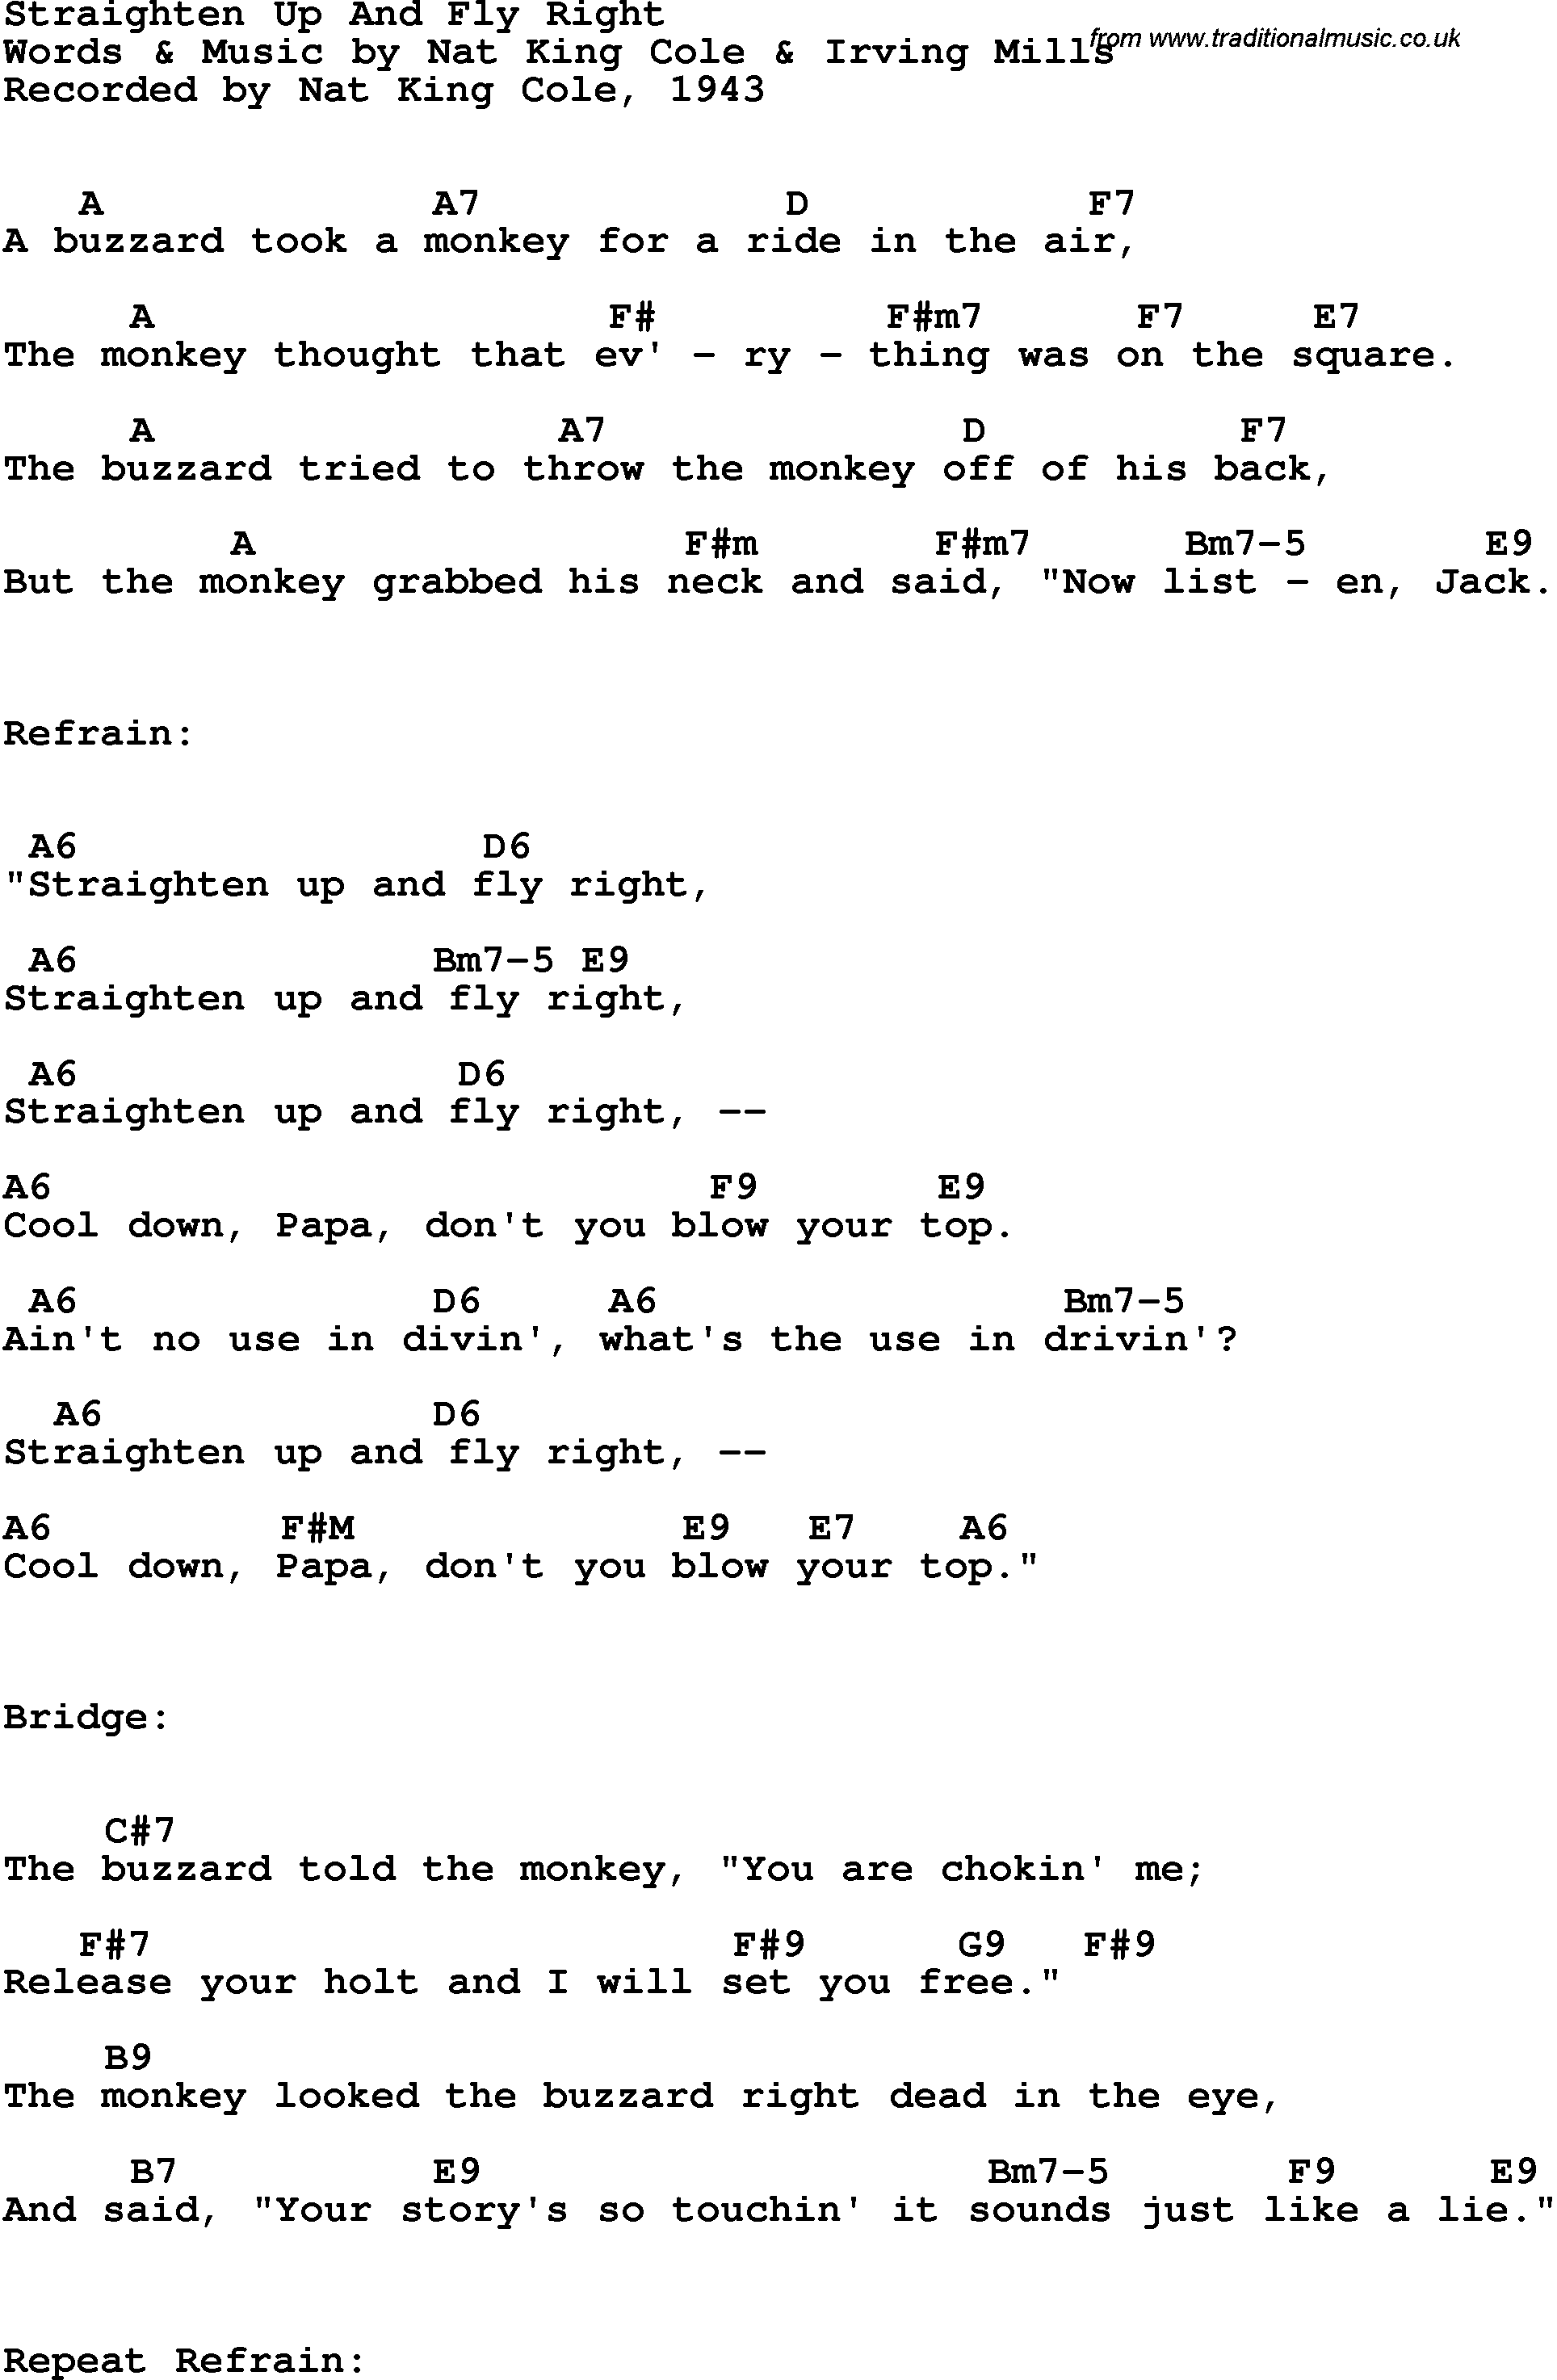 Song Lyrics with guitar chords for Straighten Up And Fly Right - Nat King Cole, 1943